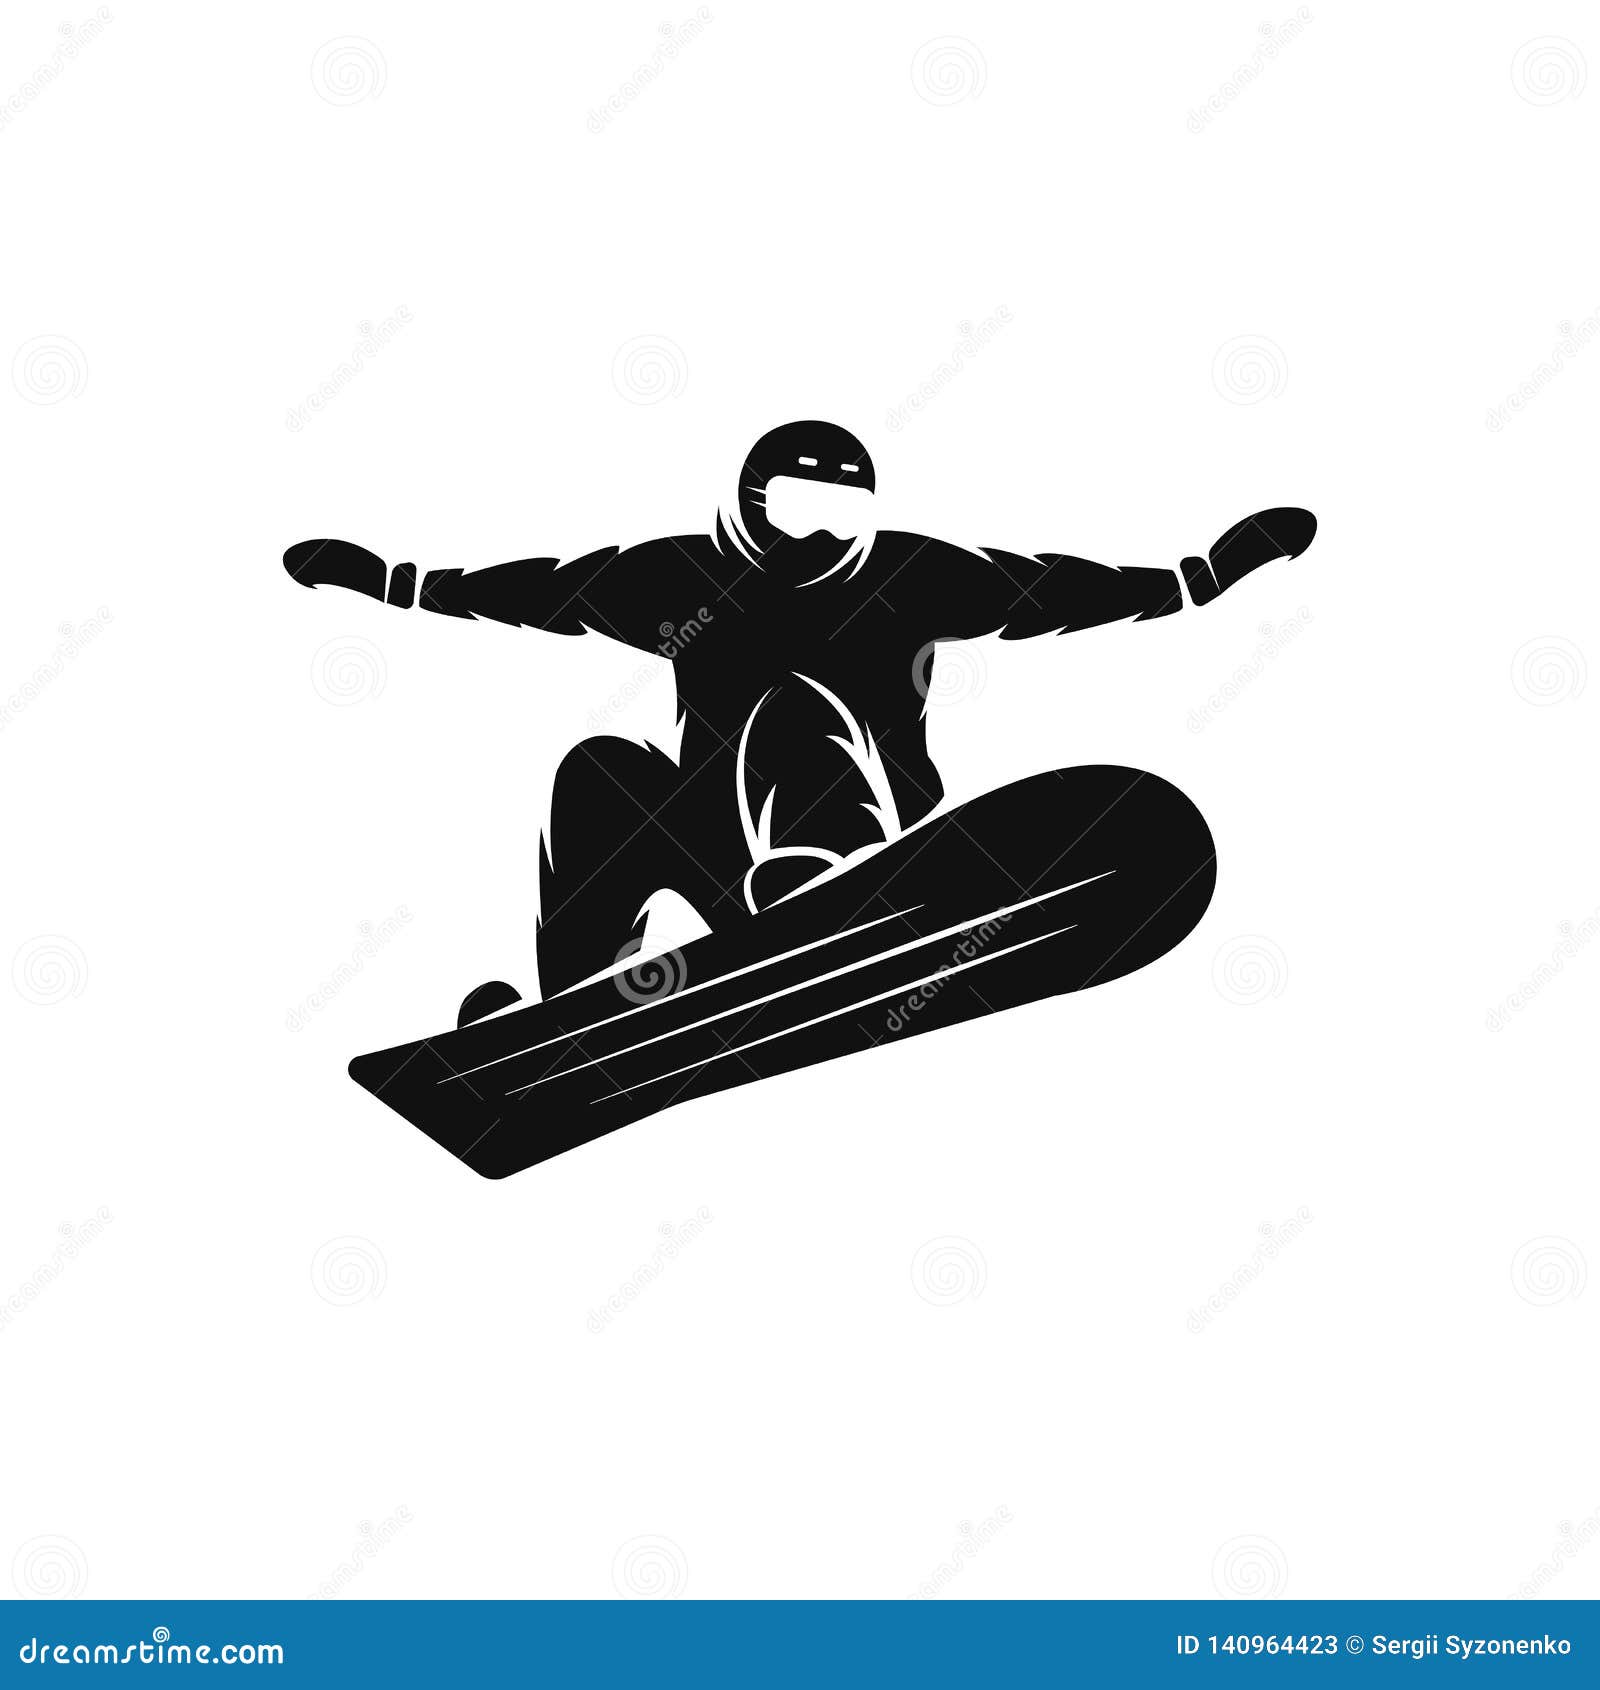 Download Silhouette Of A Snowboarder On The Snowboard Free Rider ...